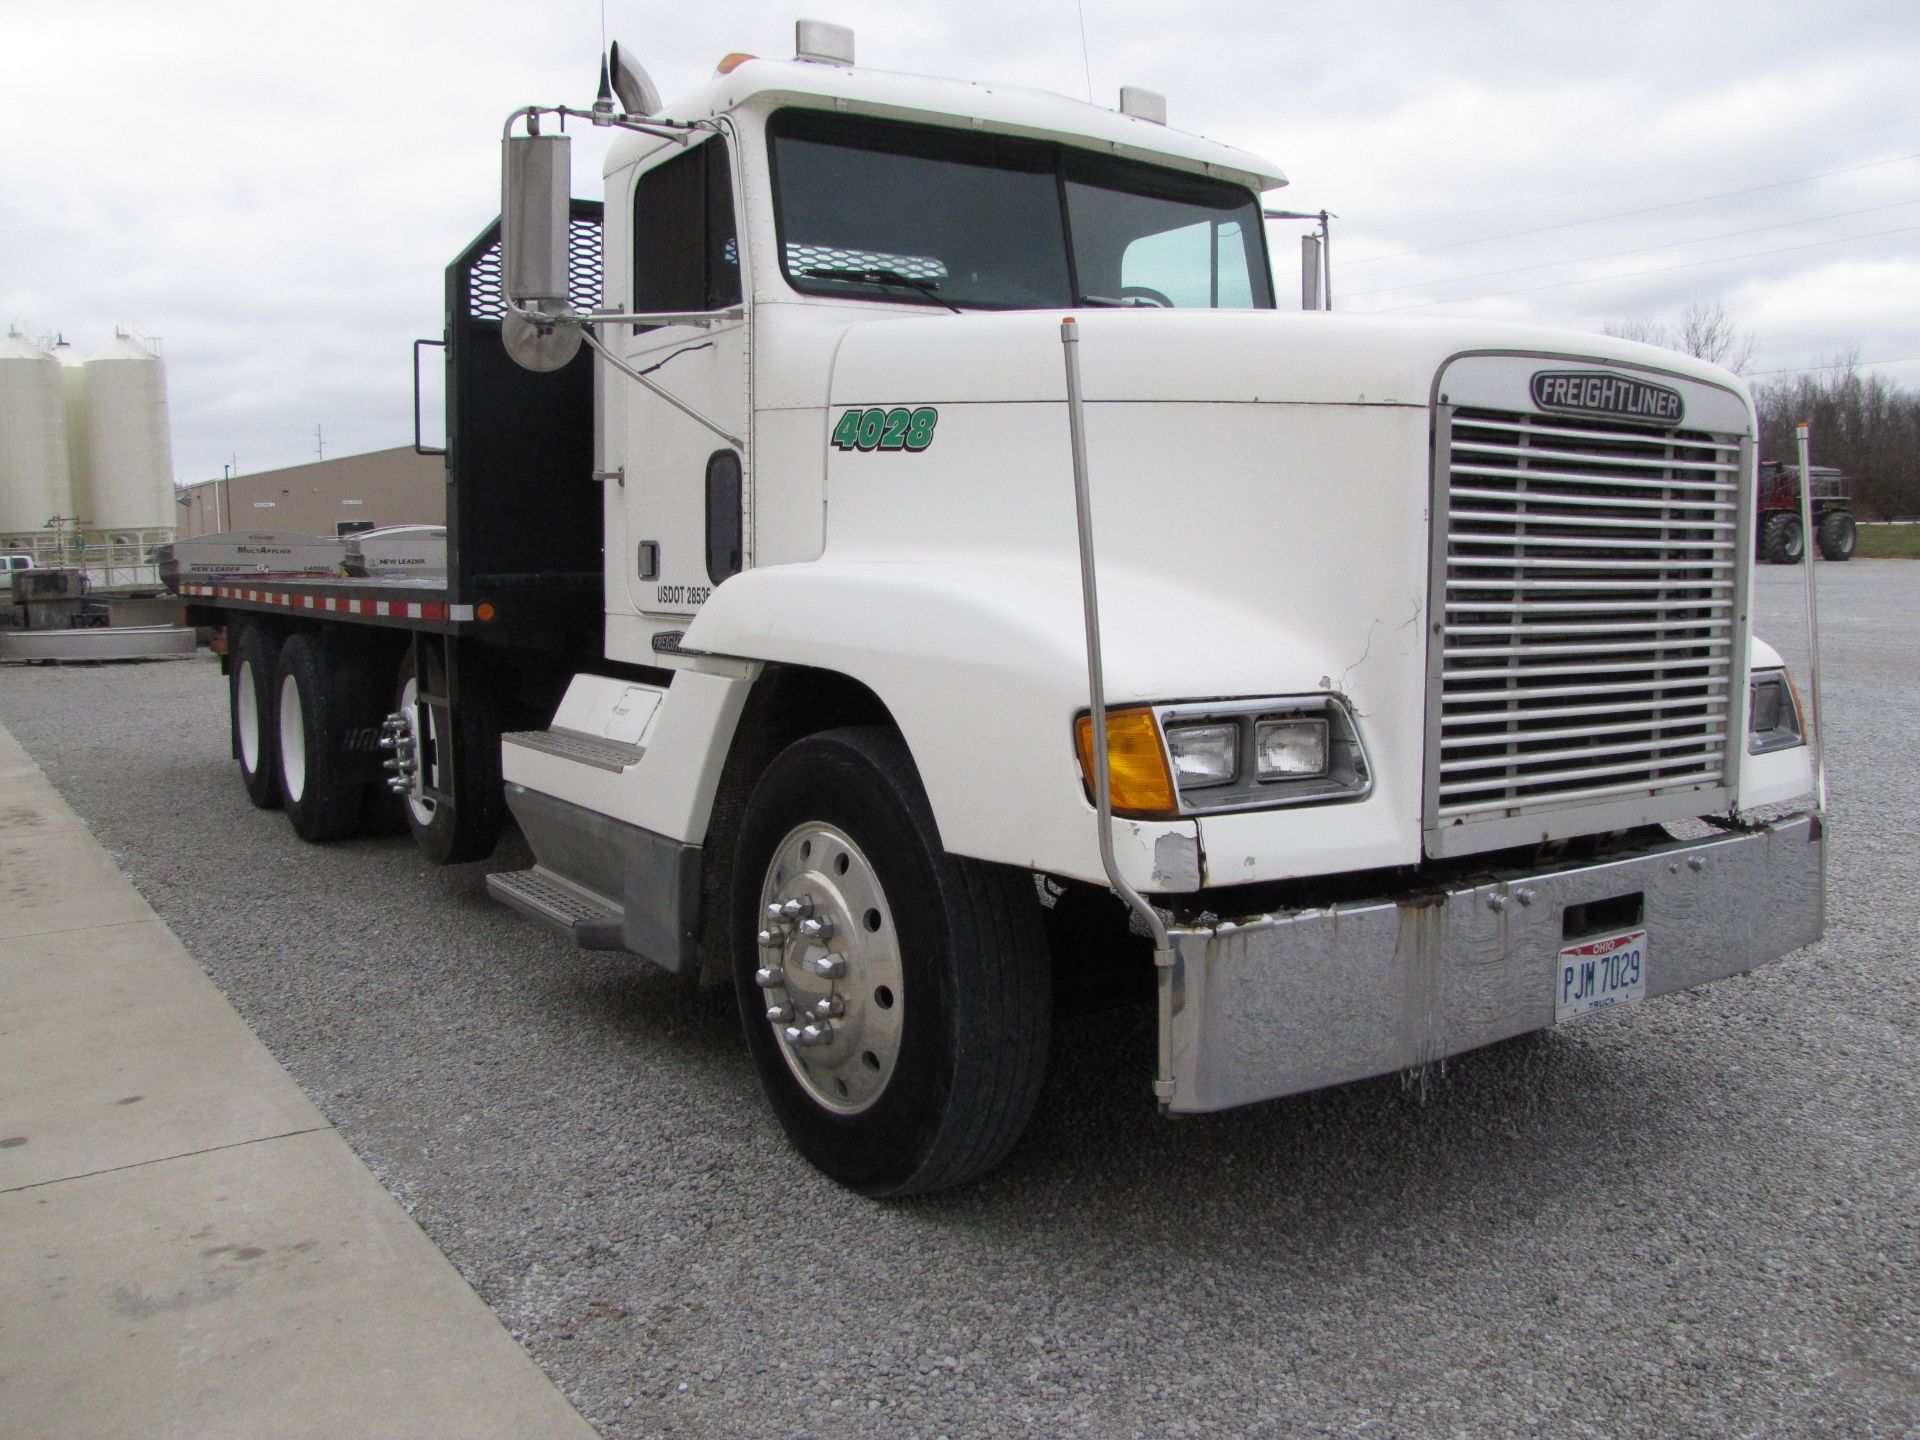 1993 Freightliner FLD120 semi truck - Image 14 of 71